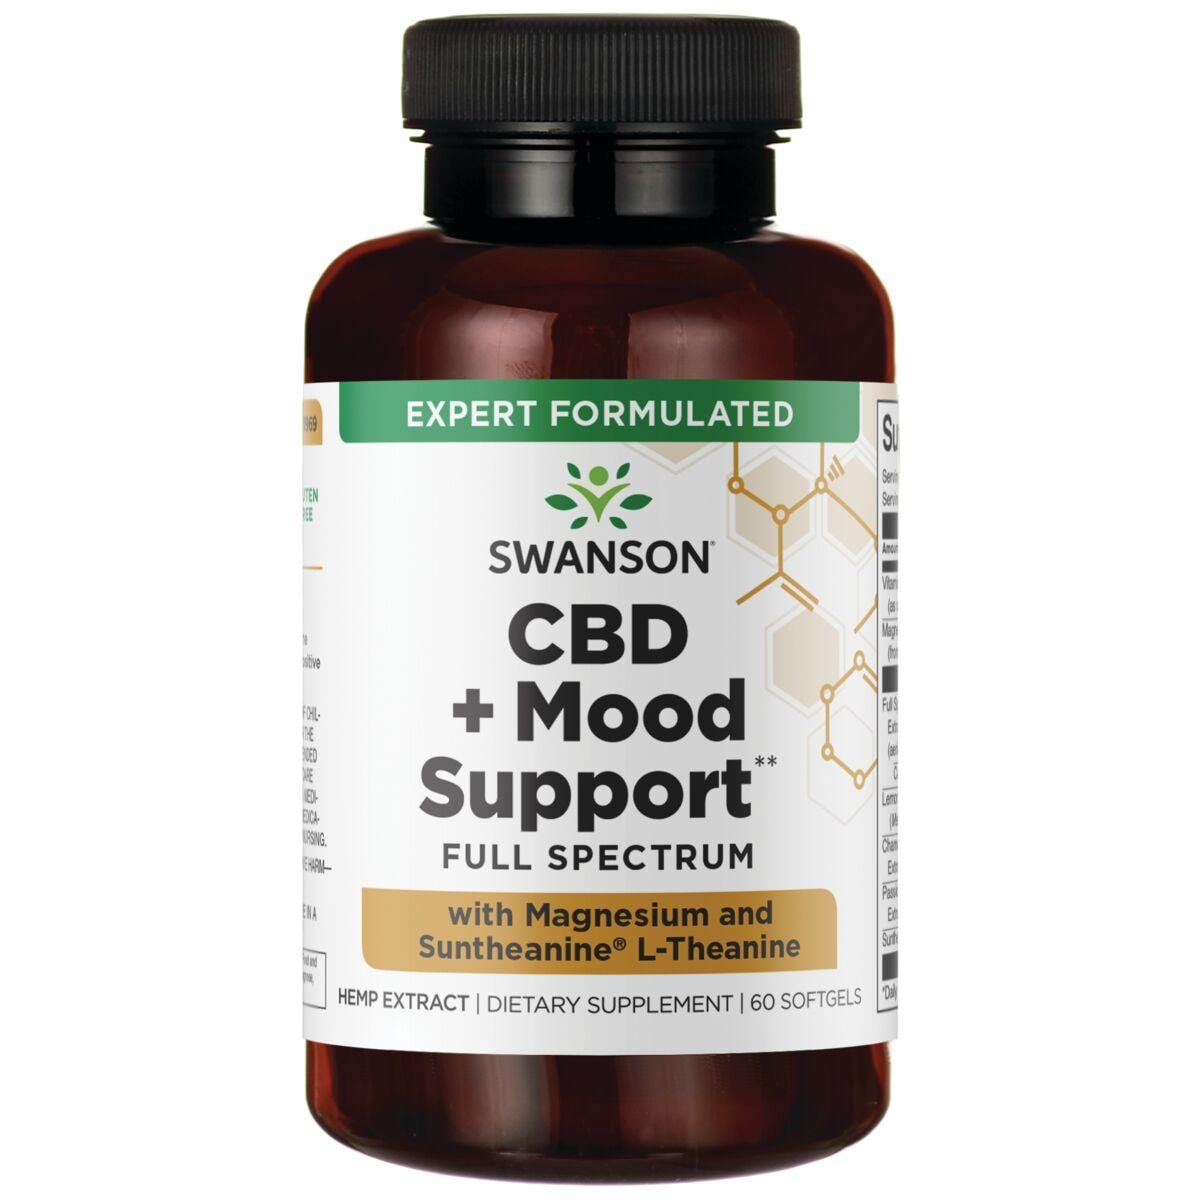 Swanson Premium Cbd + Mood Support - with Magnesium and Suntheanine L-Theanine Supplement Vitamin | 15 mg | 60 Soft Gels